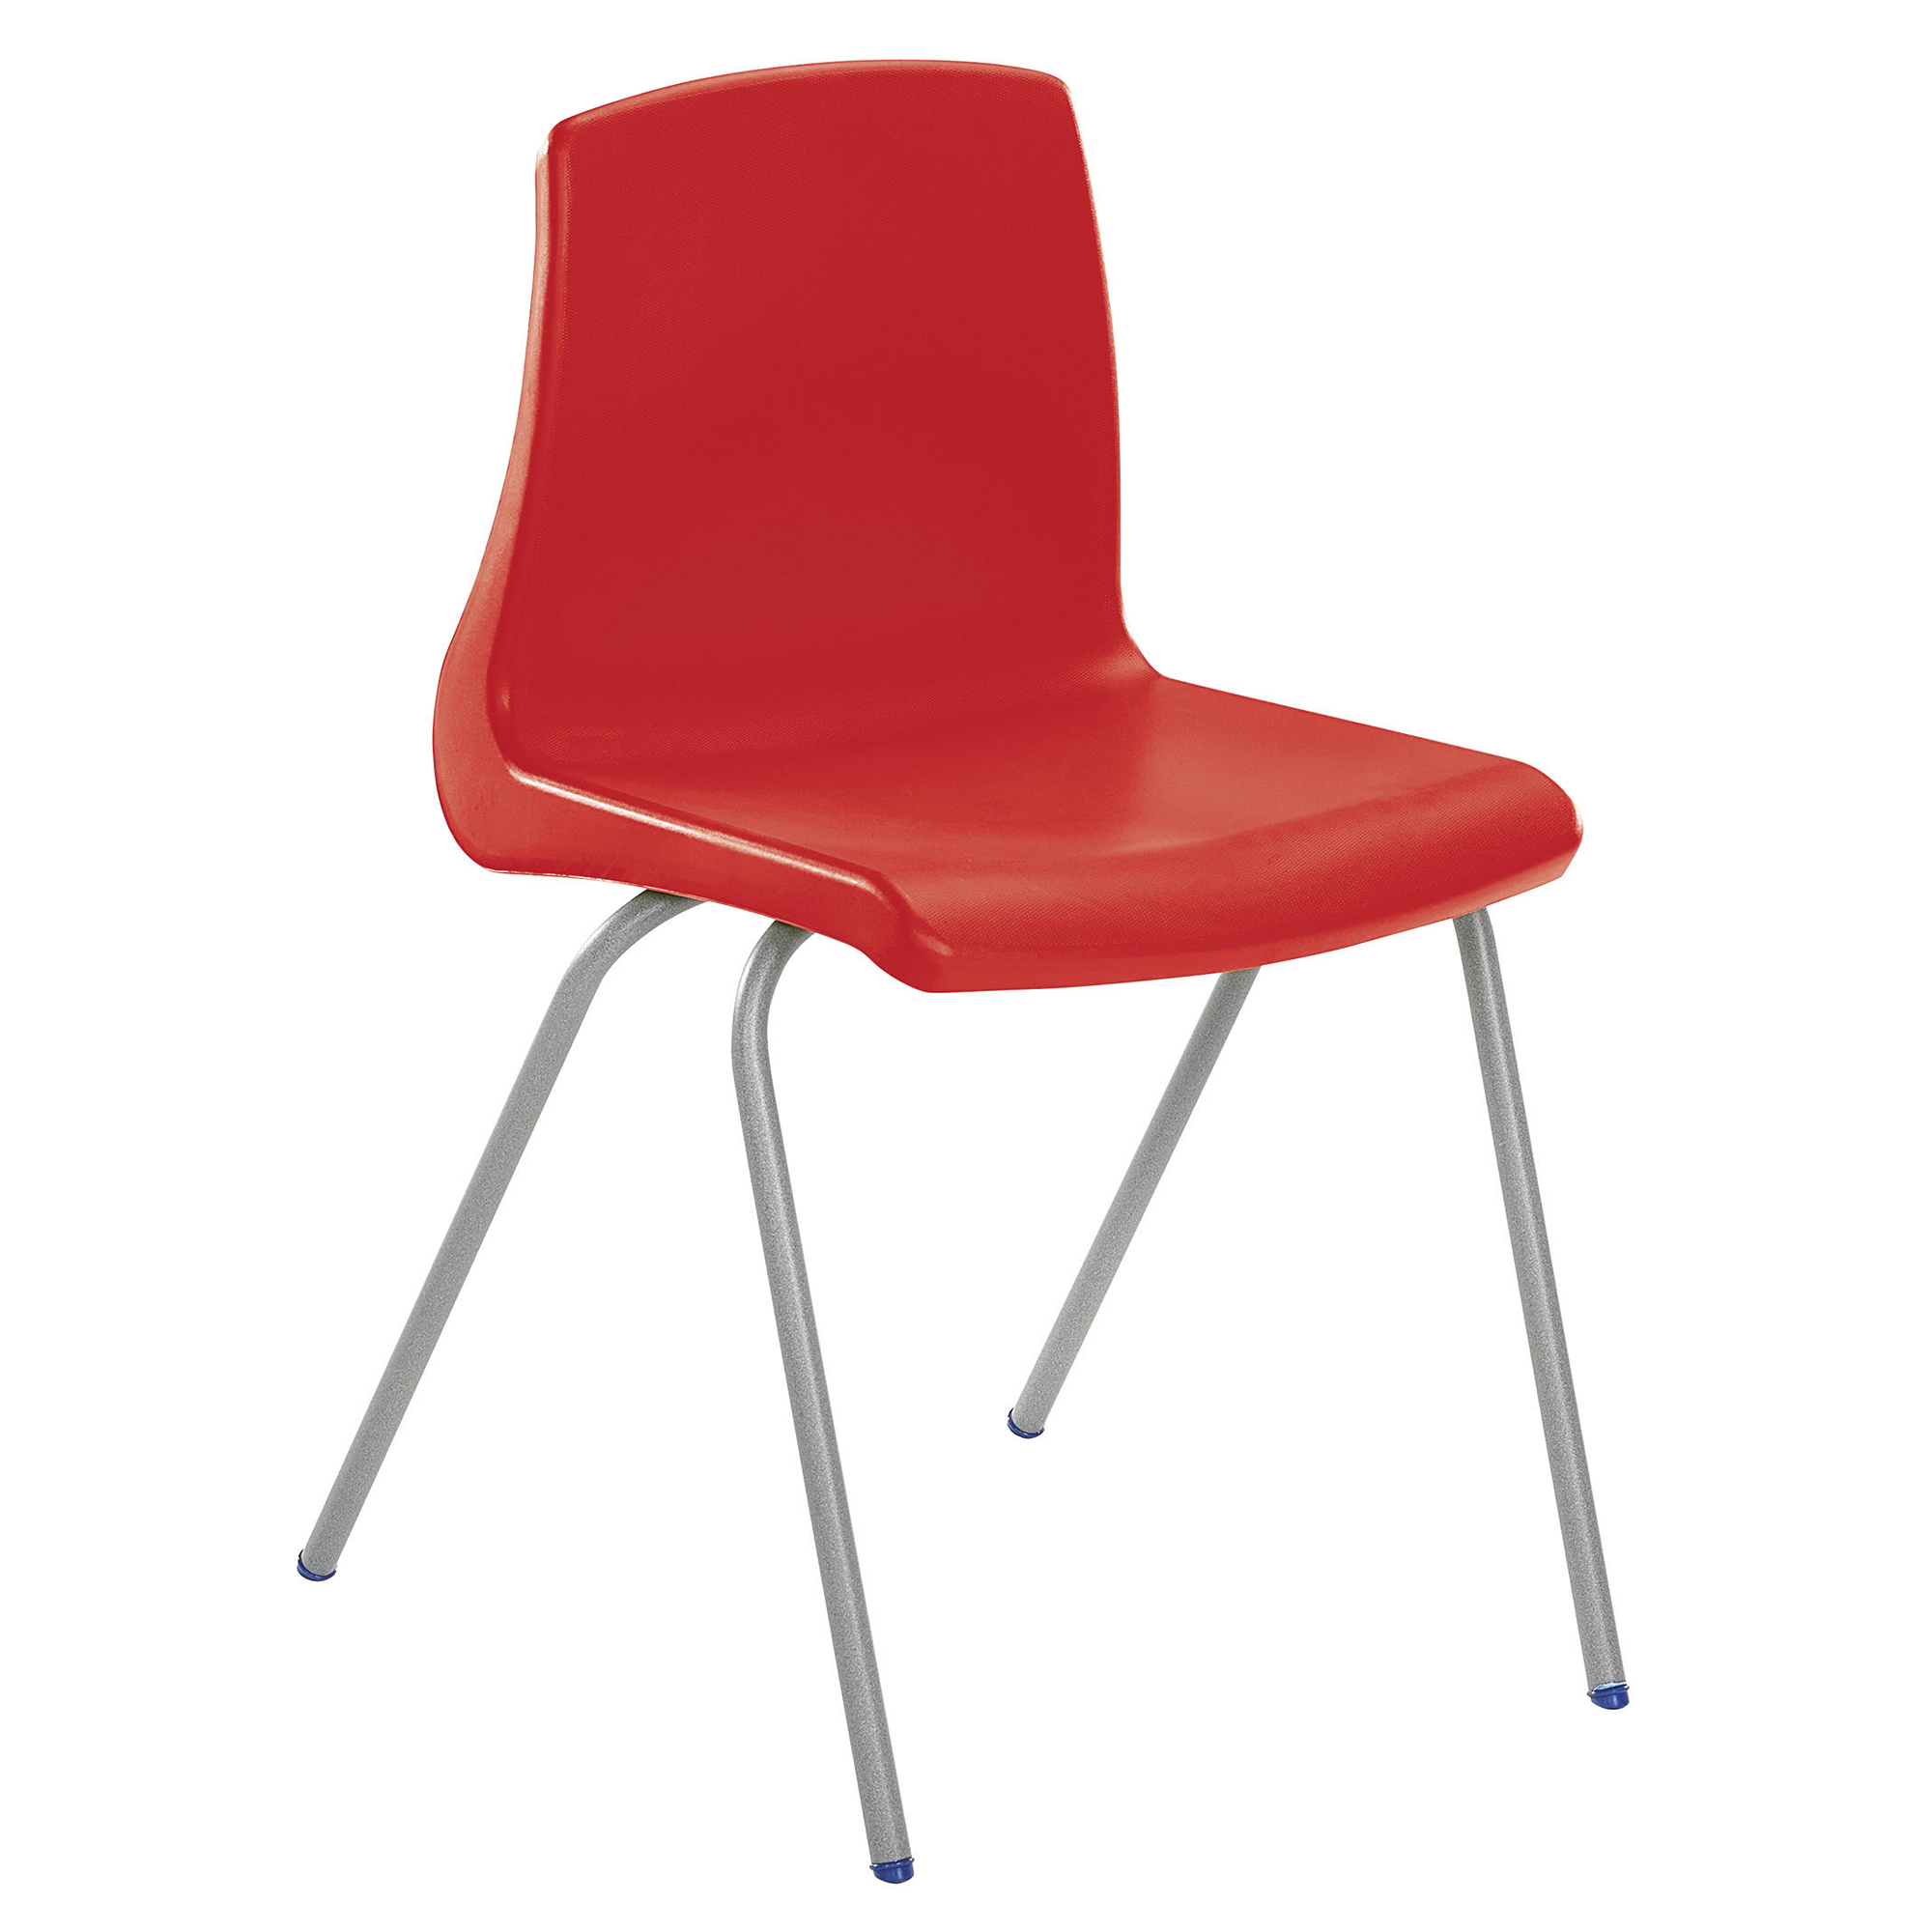 NP Chairs H460mm - Red